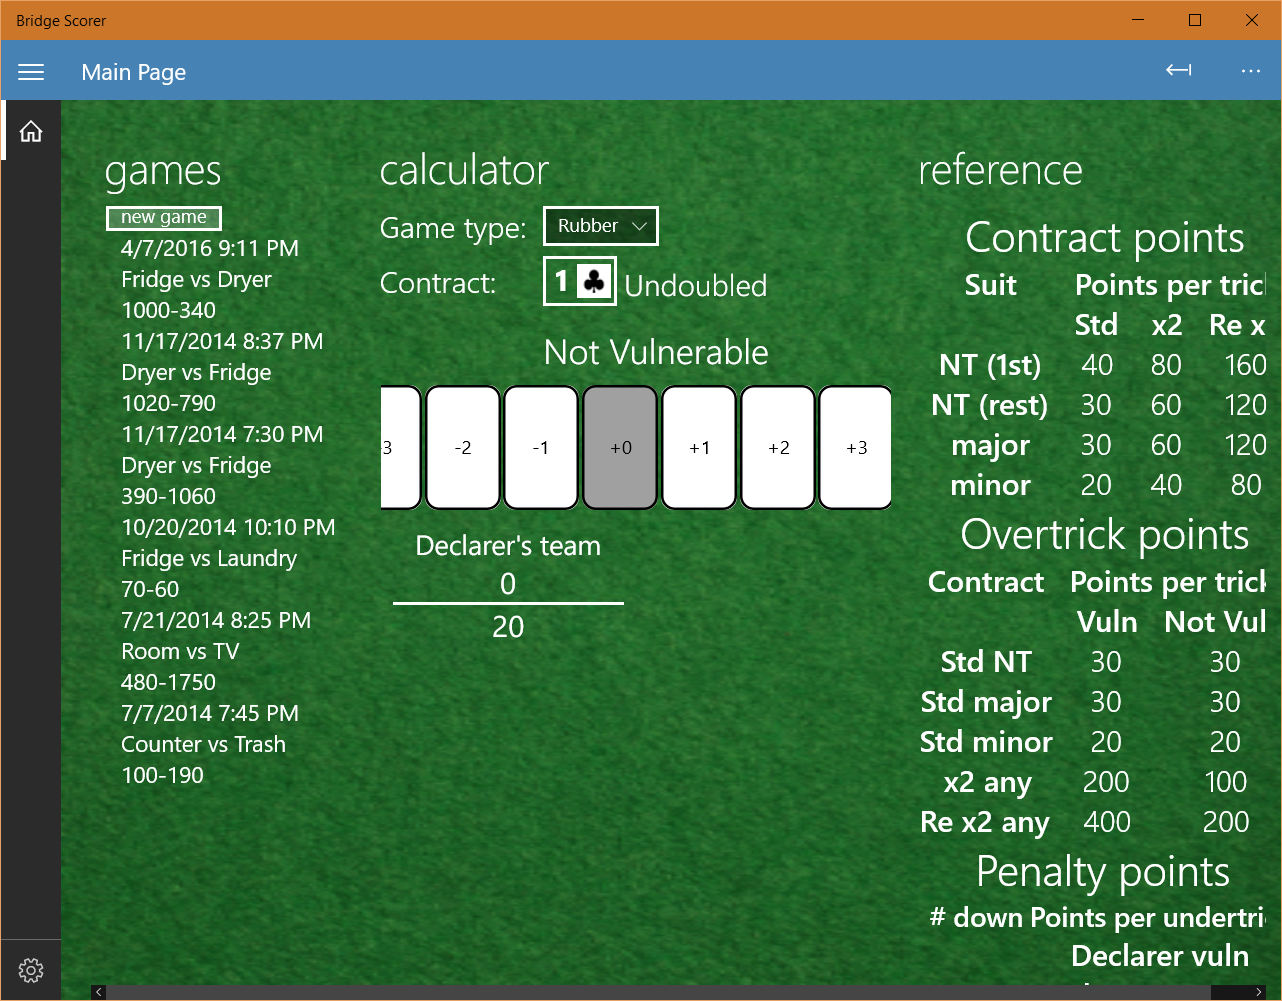 Main screen - shows the calculator and reference sections